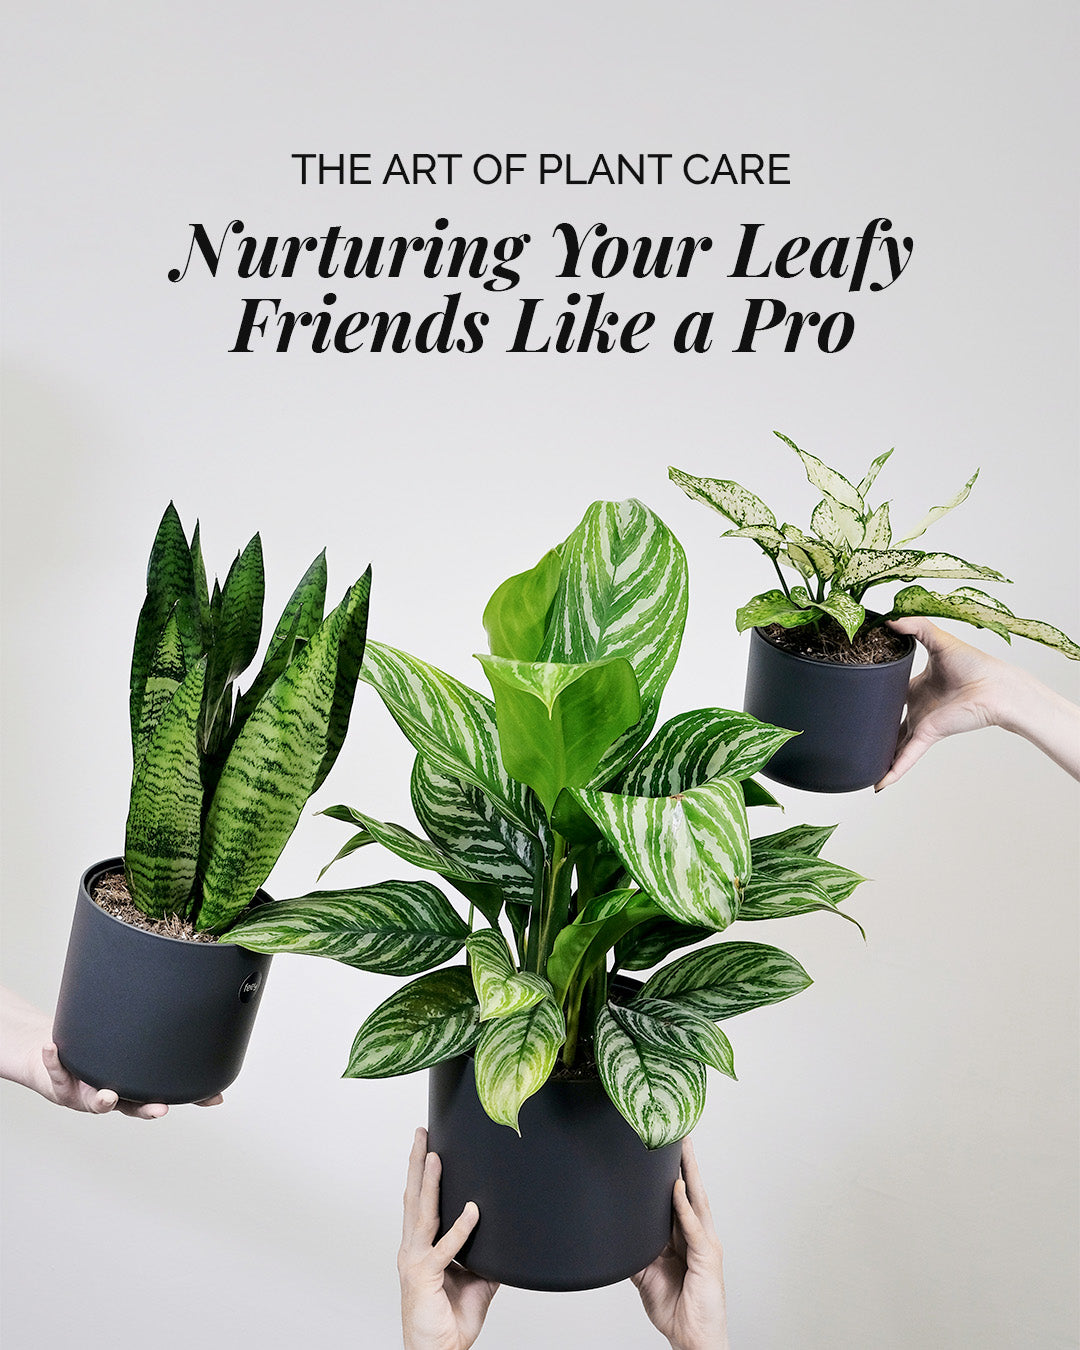 The Art of Plant Care: Nurturing Your Leafy Friends Like a Pro